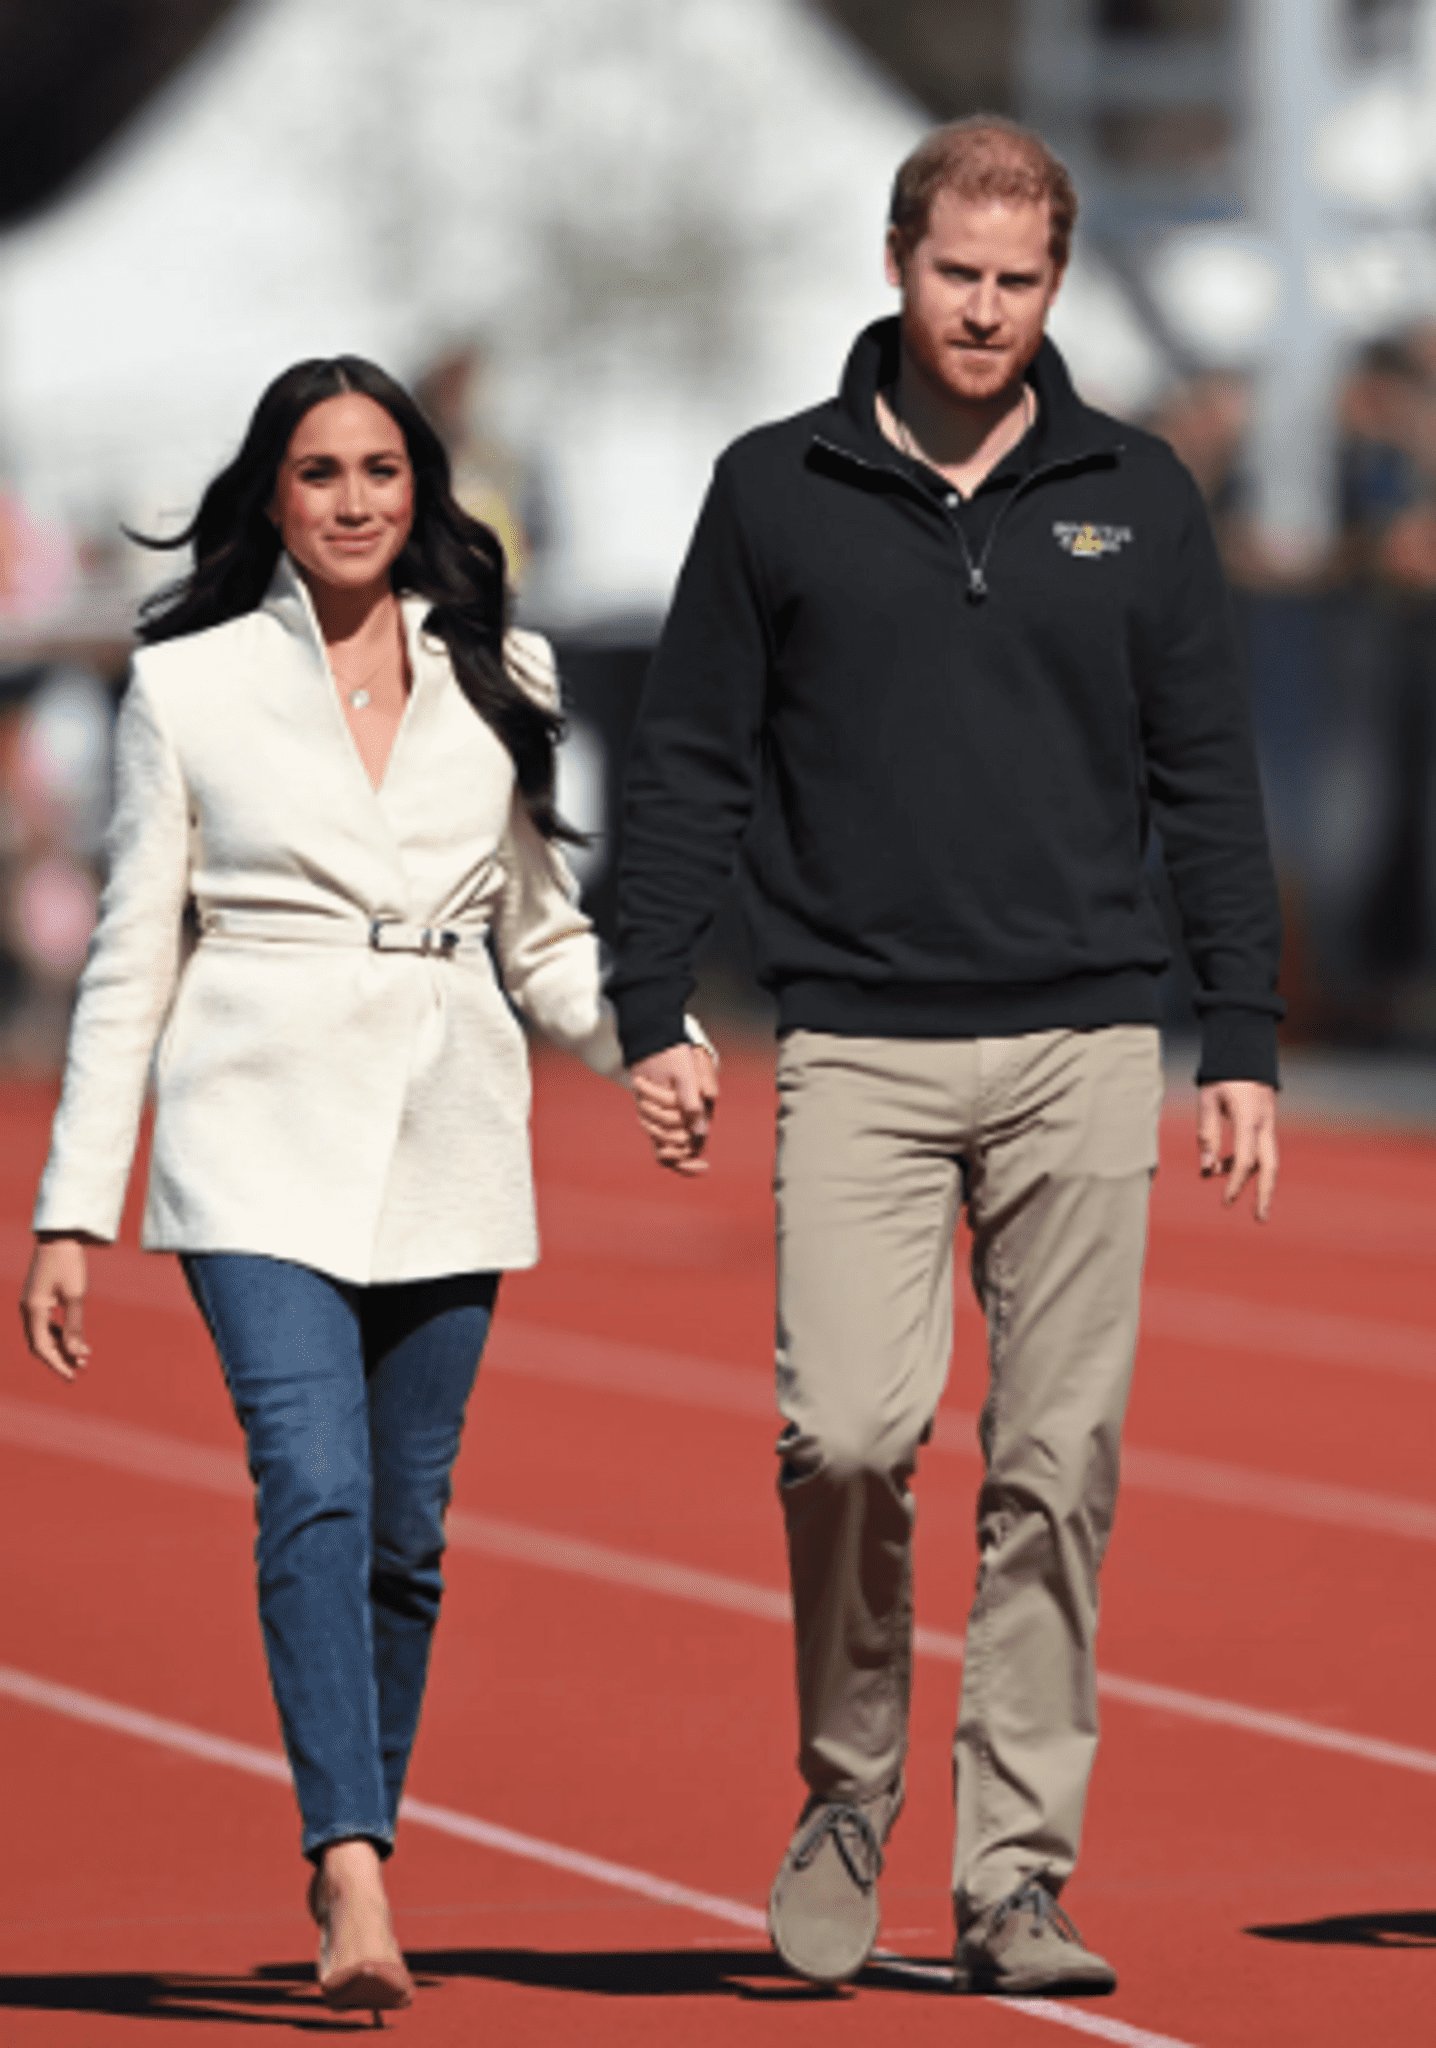 ”prince-harry-and-meghan-markle-came-to-the-uk-on-the-eve-of-the-monarchs-platinum-jubilee”